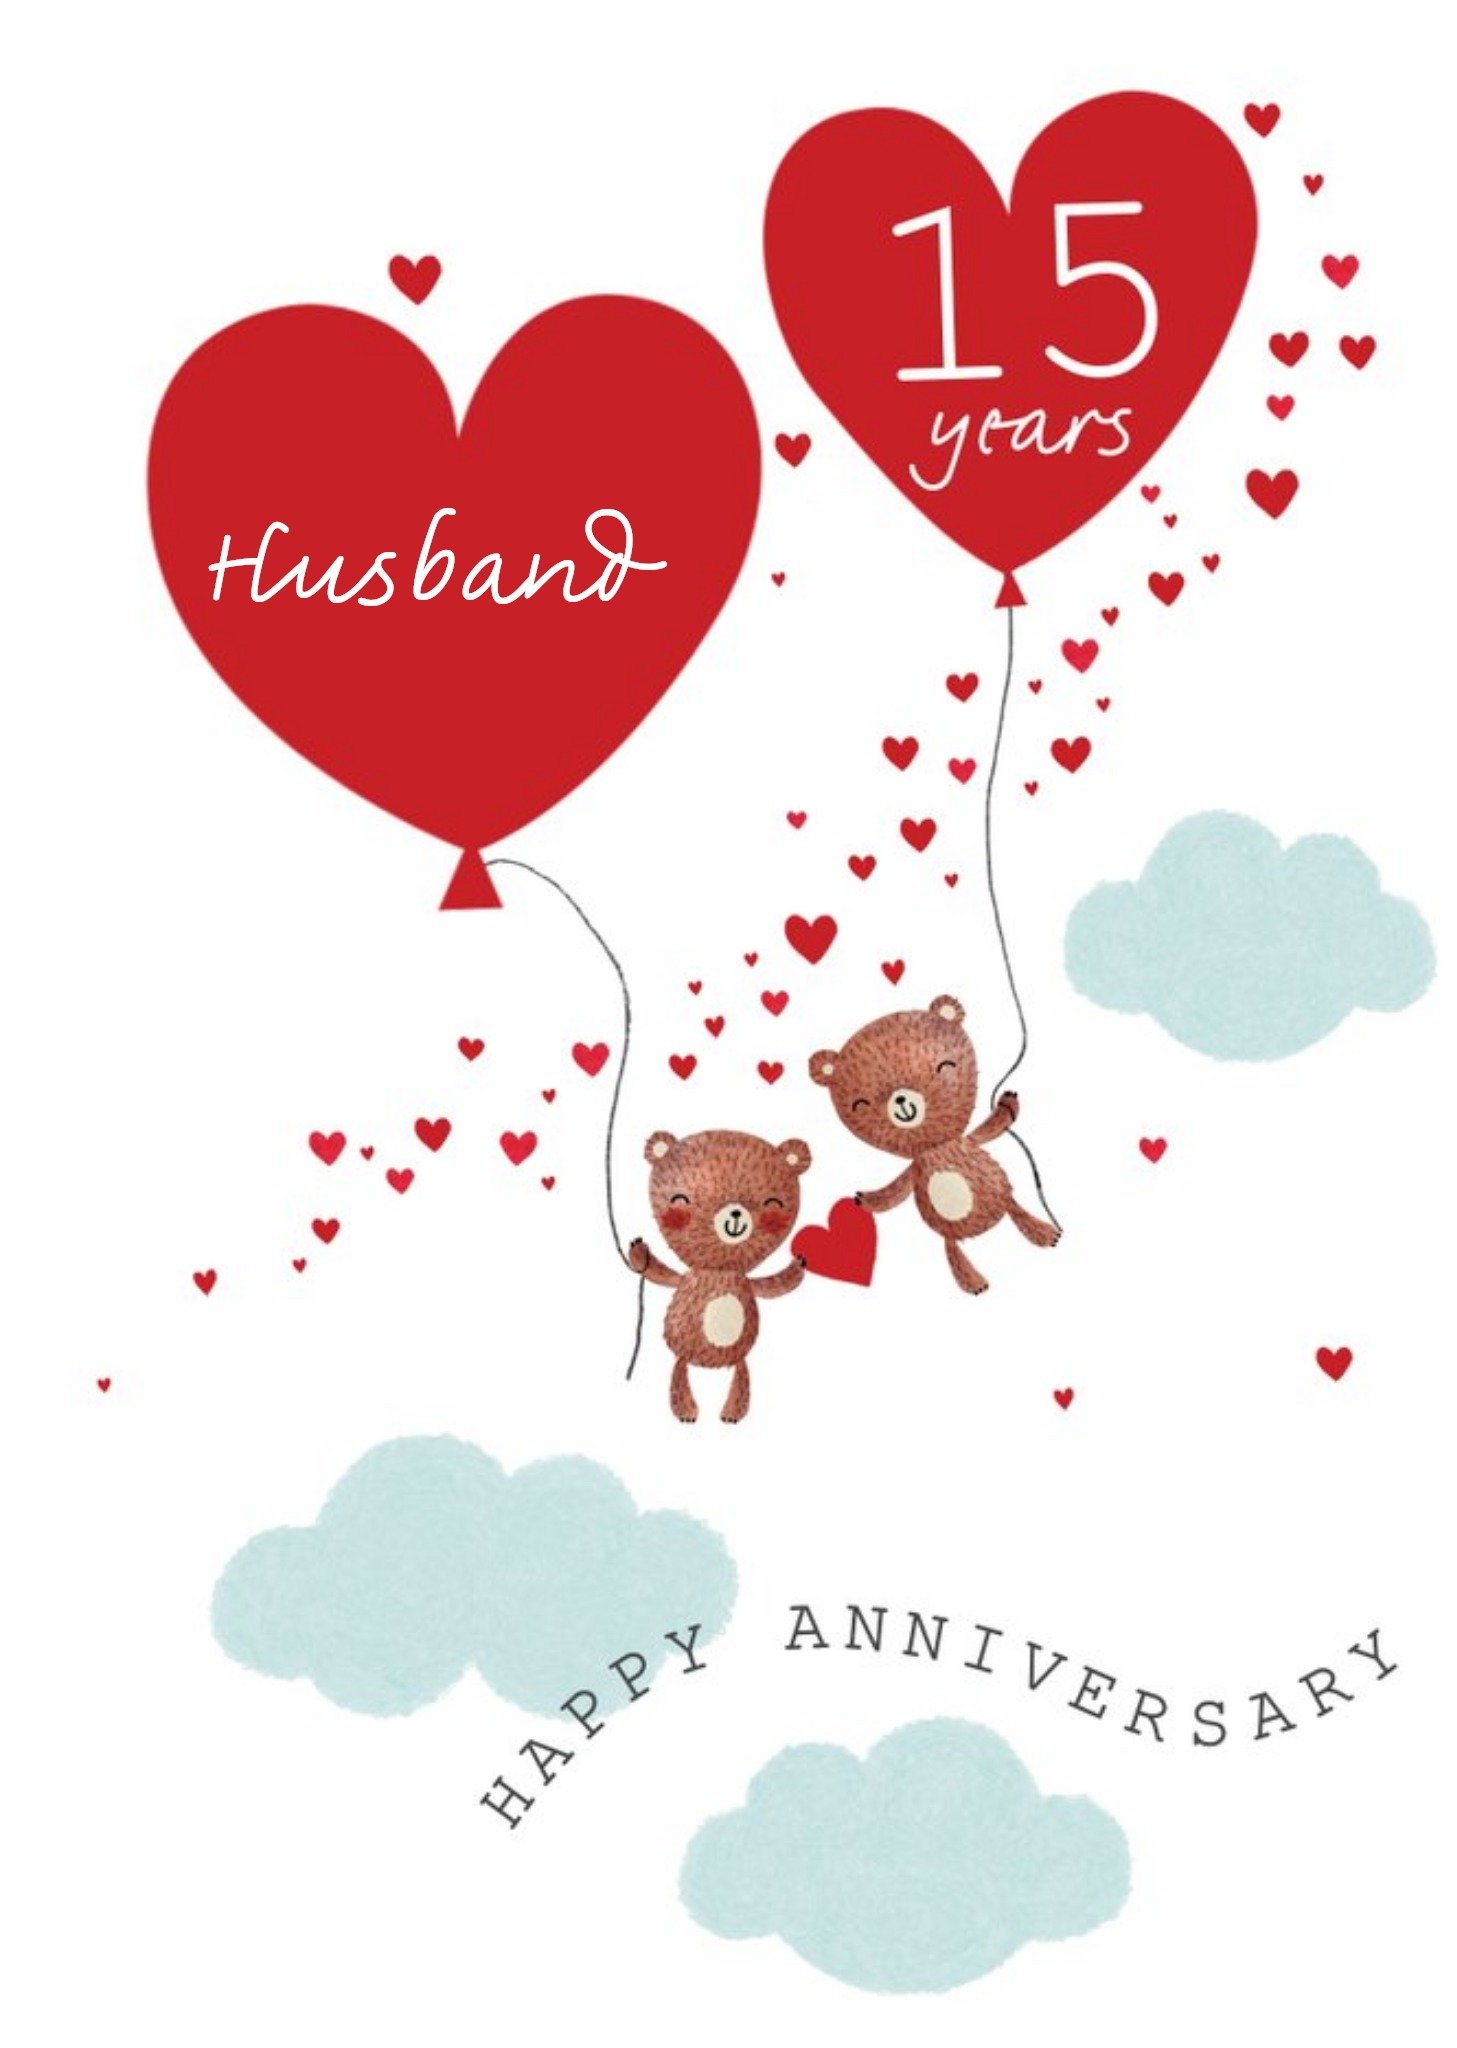 Moonpig Illustrated Teddy Bears With Heart Balloons Customisable 15th Anniversary Card, Large